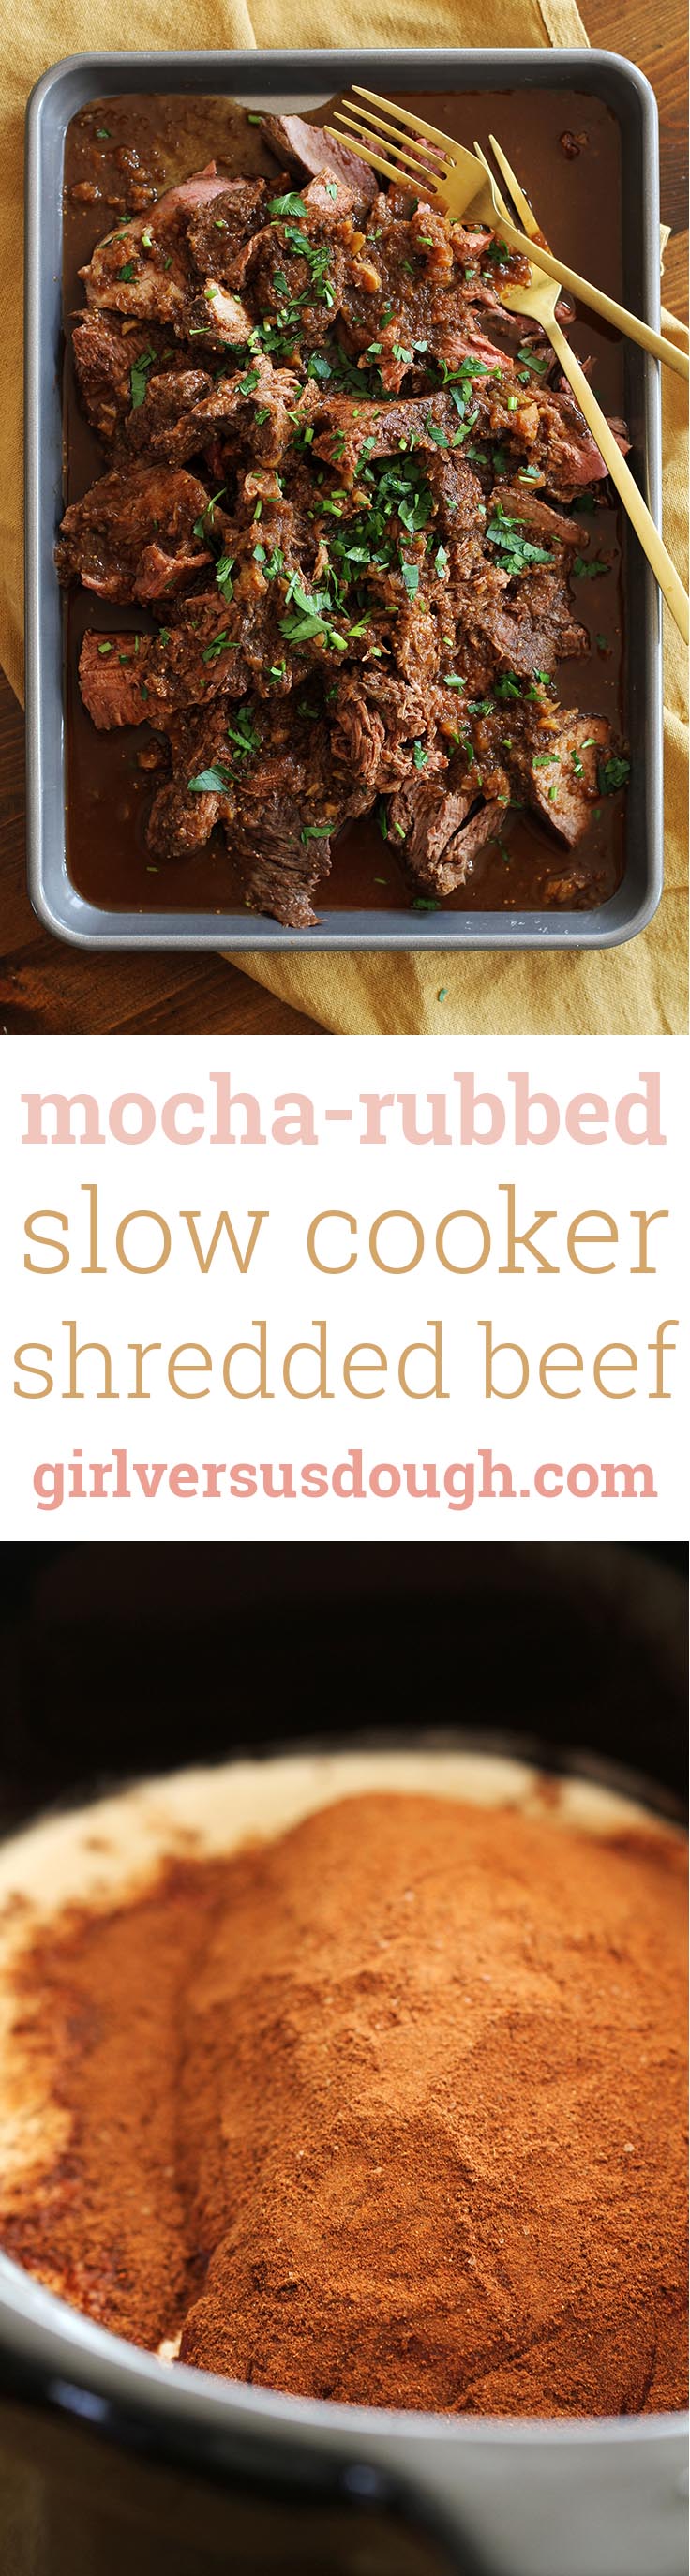 Mocha Rubbed Slow Cooker Shredded Beef -- Espresso and cocoa come together in this delicious, tender crockpot pot roast. www.girlversusdough.com @girlversusdough